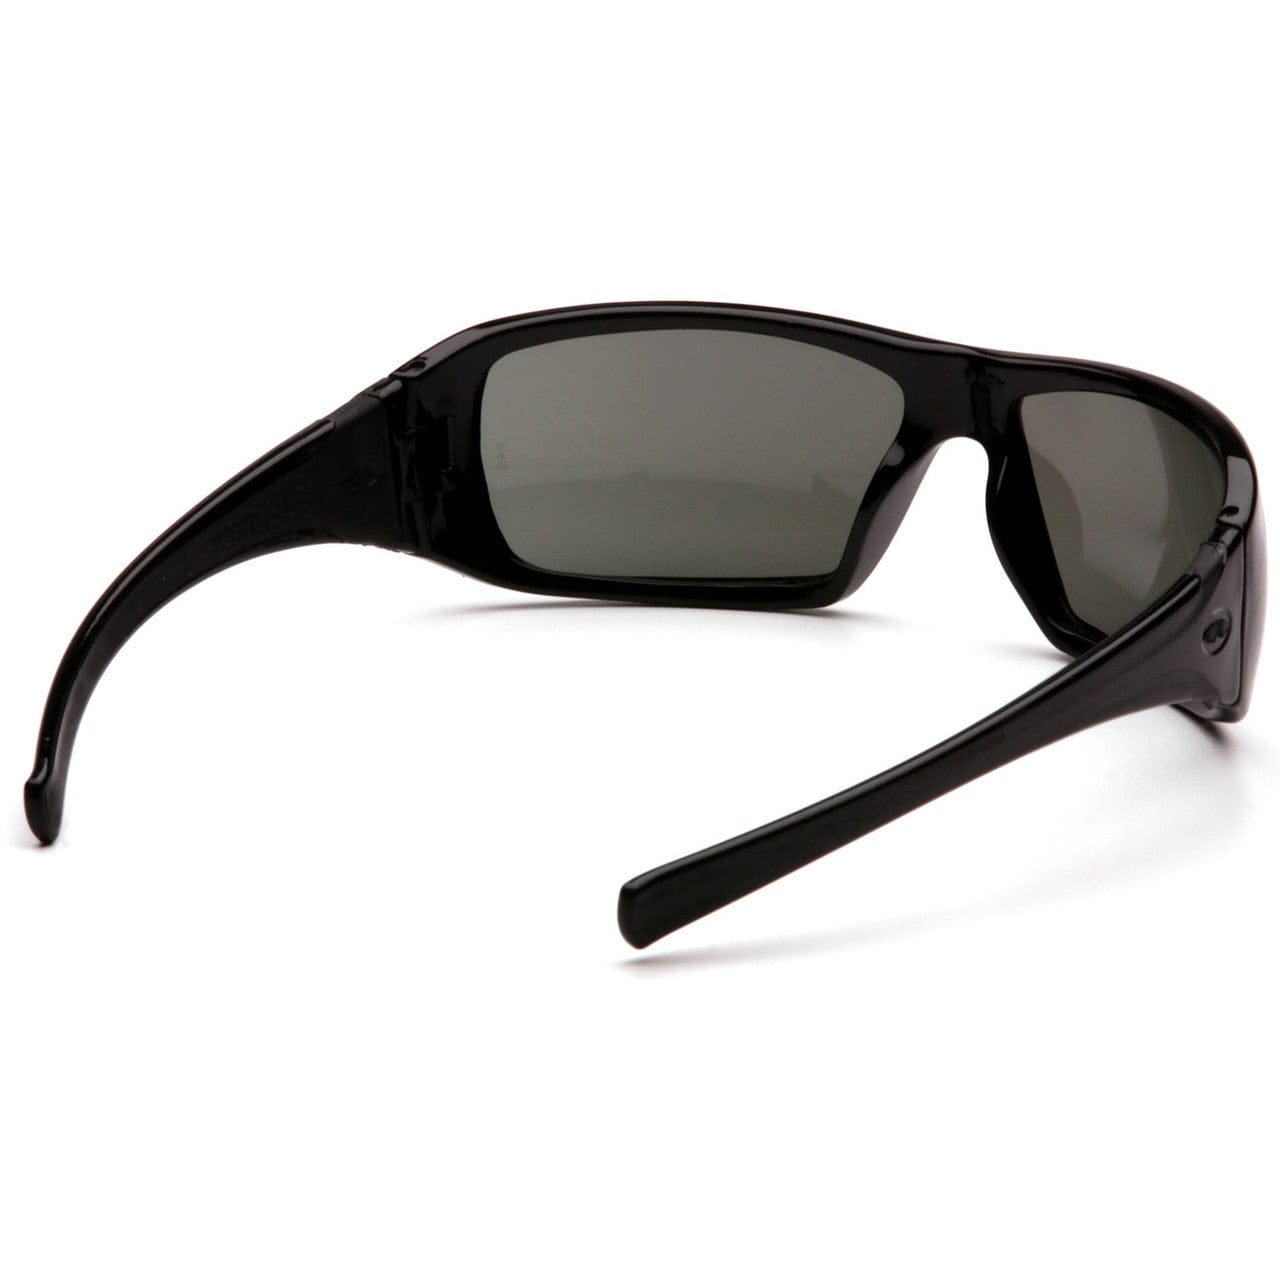 Pyramex Goliath Safety Glasses with Black Frame and Gray Polarized Lens SB5621D Inside View